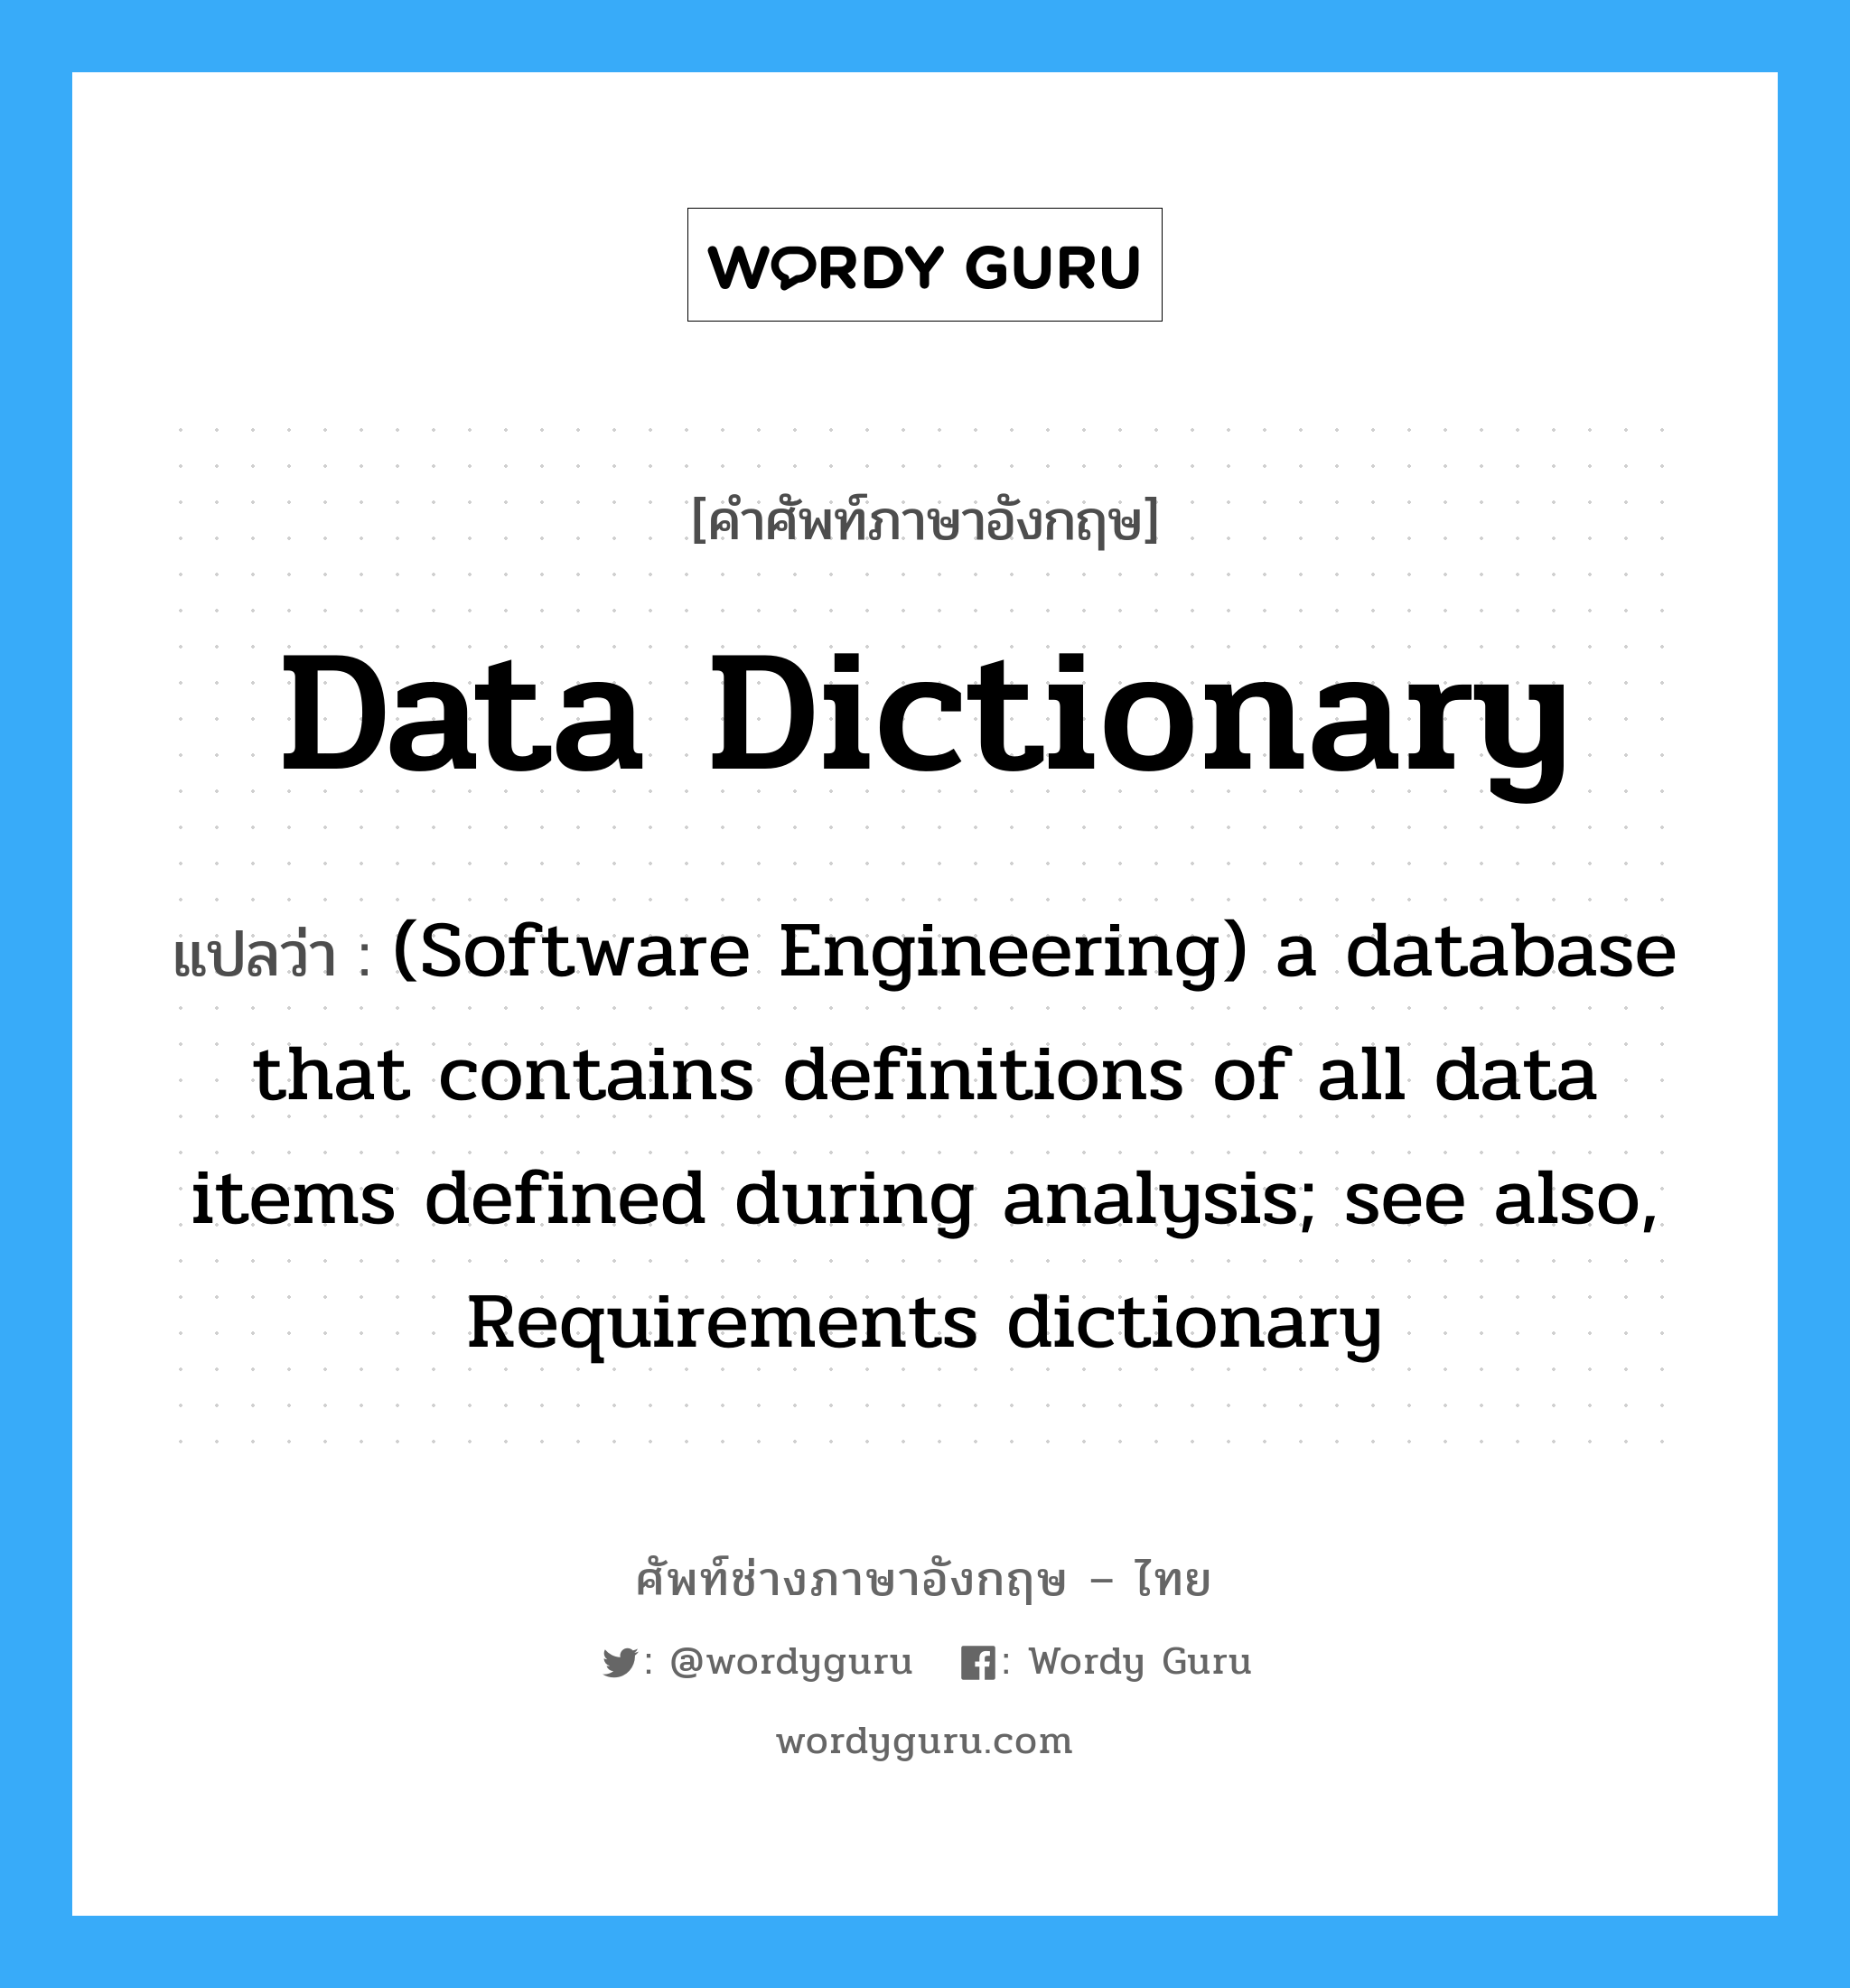 (Software Engineering) a database that contains definitions of all data items defined during analysis; see also, Requirements dictionary ภาษาอังกฤษ?, คำศัพท์ช่างภาษาอังกฤษ - ไทย (Software Engineering) a database that contains definitions of all data items defined during analysis; see also, Requirements dictionary คำศัพท์ภาษาอังกฤษ (Software Engineering) a database that contains definitions of all data items defined during analysis; see also, Requirements dictionary แปลว่า Data dictionary